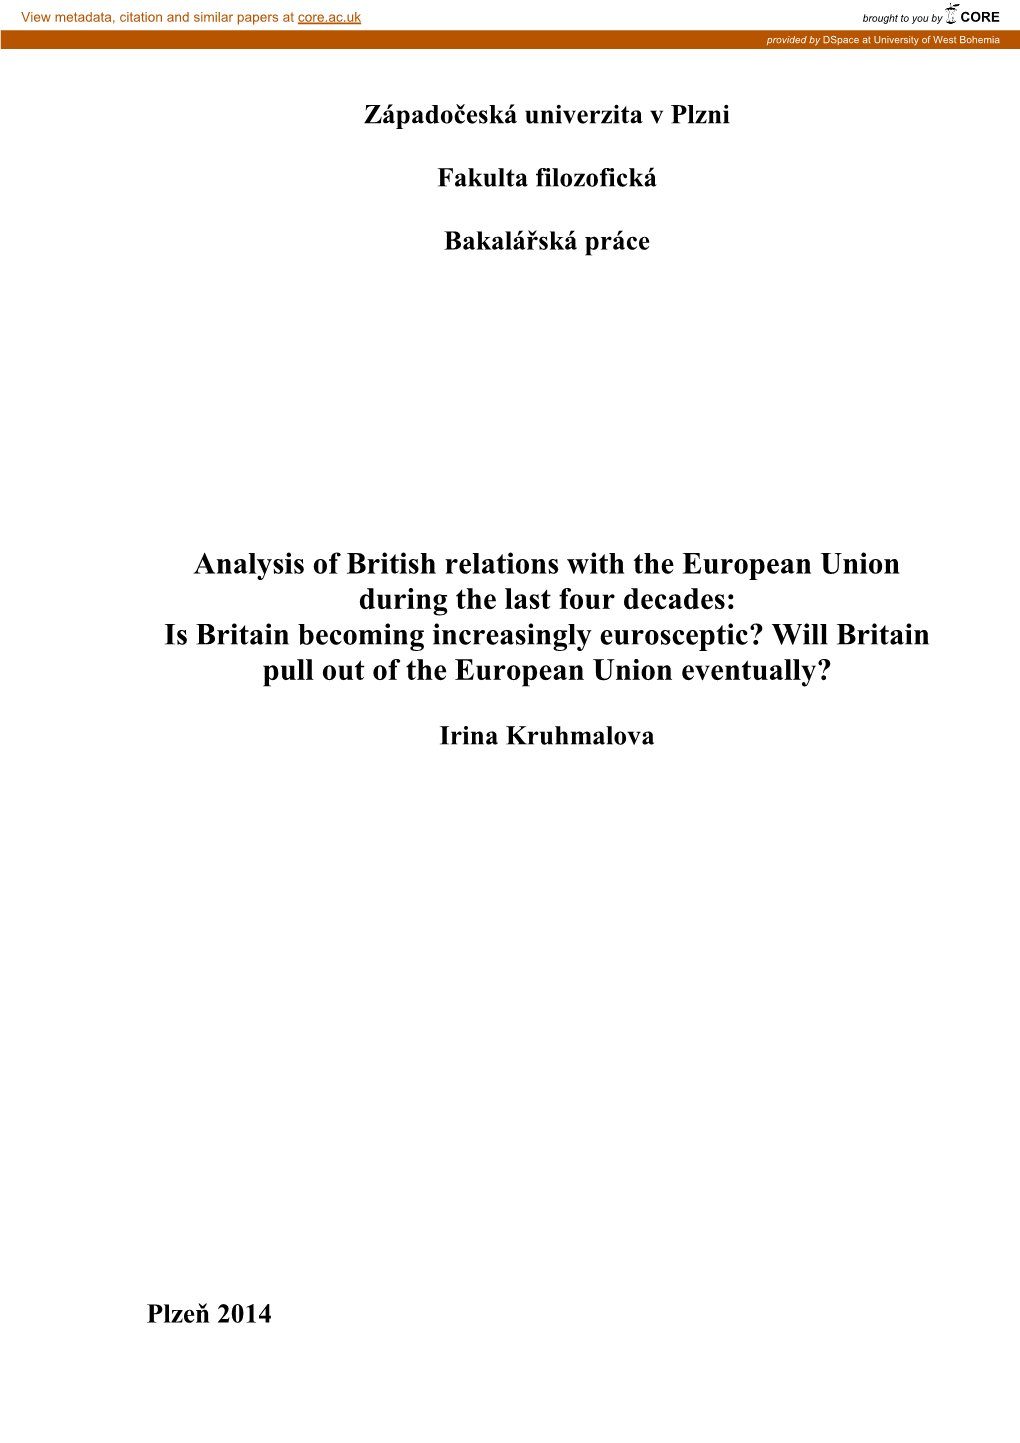 Analysis of British Relations with the European Union During the Last Four Decades: Is Britain Becoming Increasingly Eurosceptic